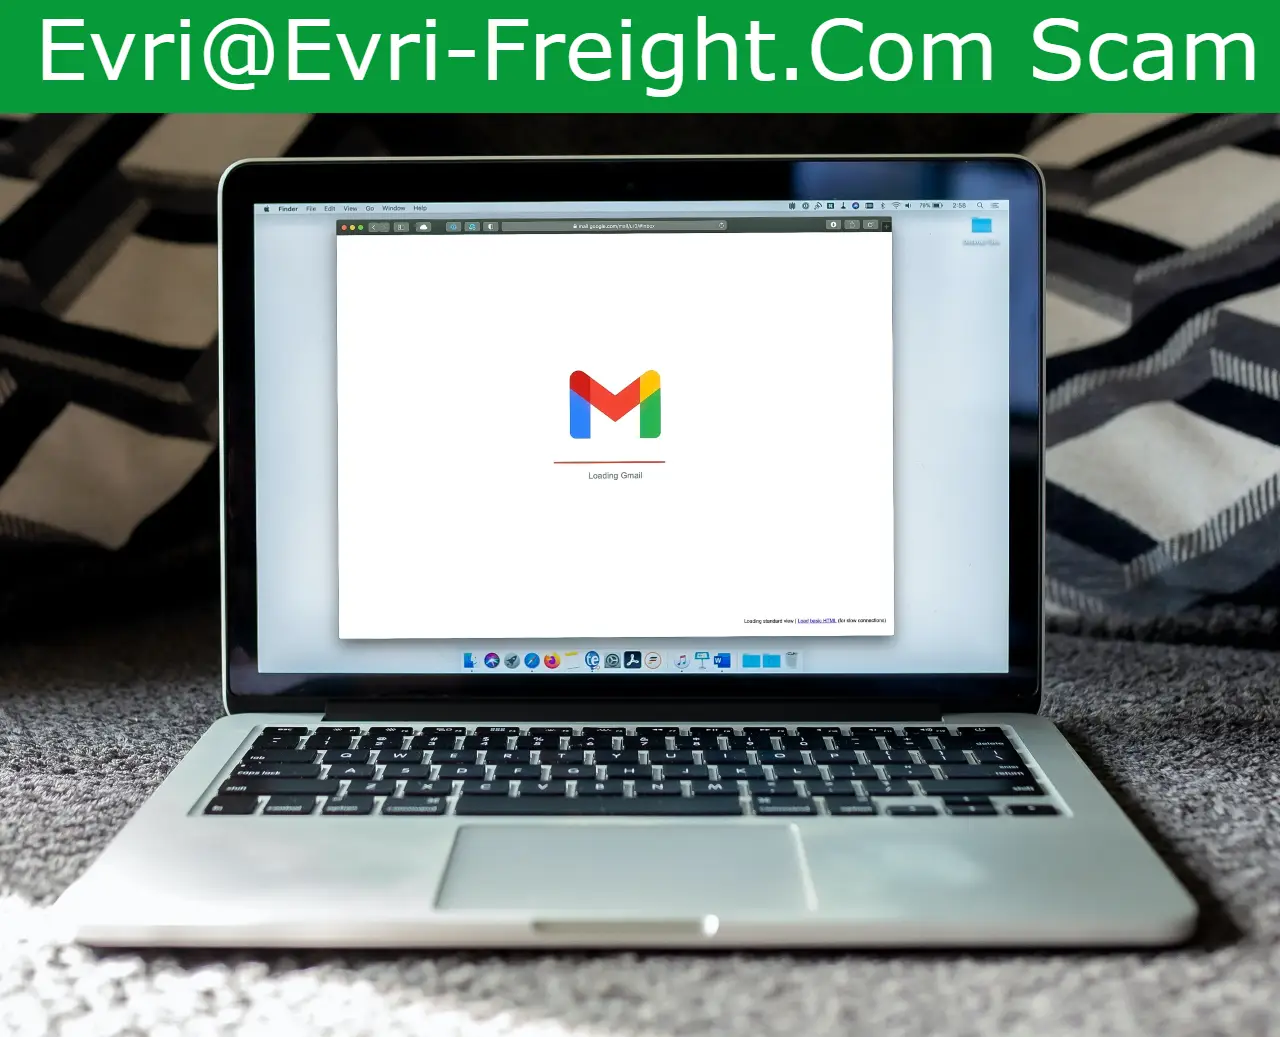 You are currently viewing Evri@Evri-Freight.Com Scam: Stop Falling Victim